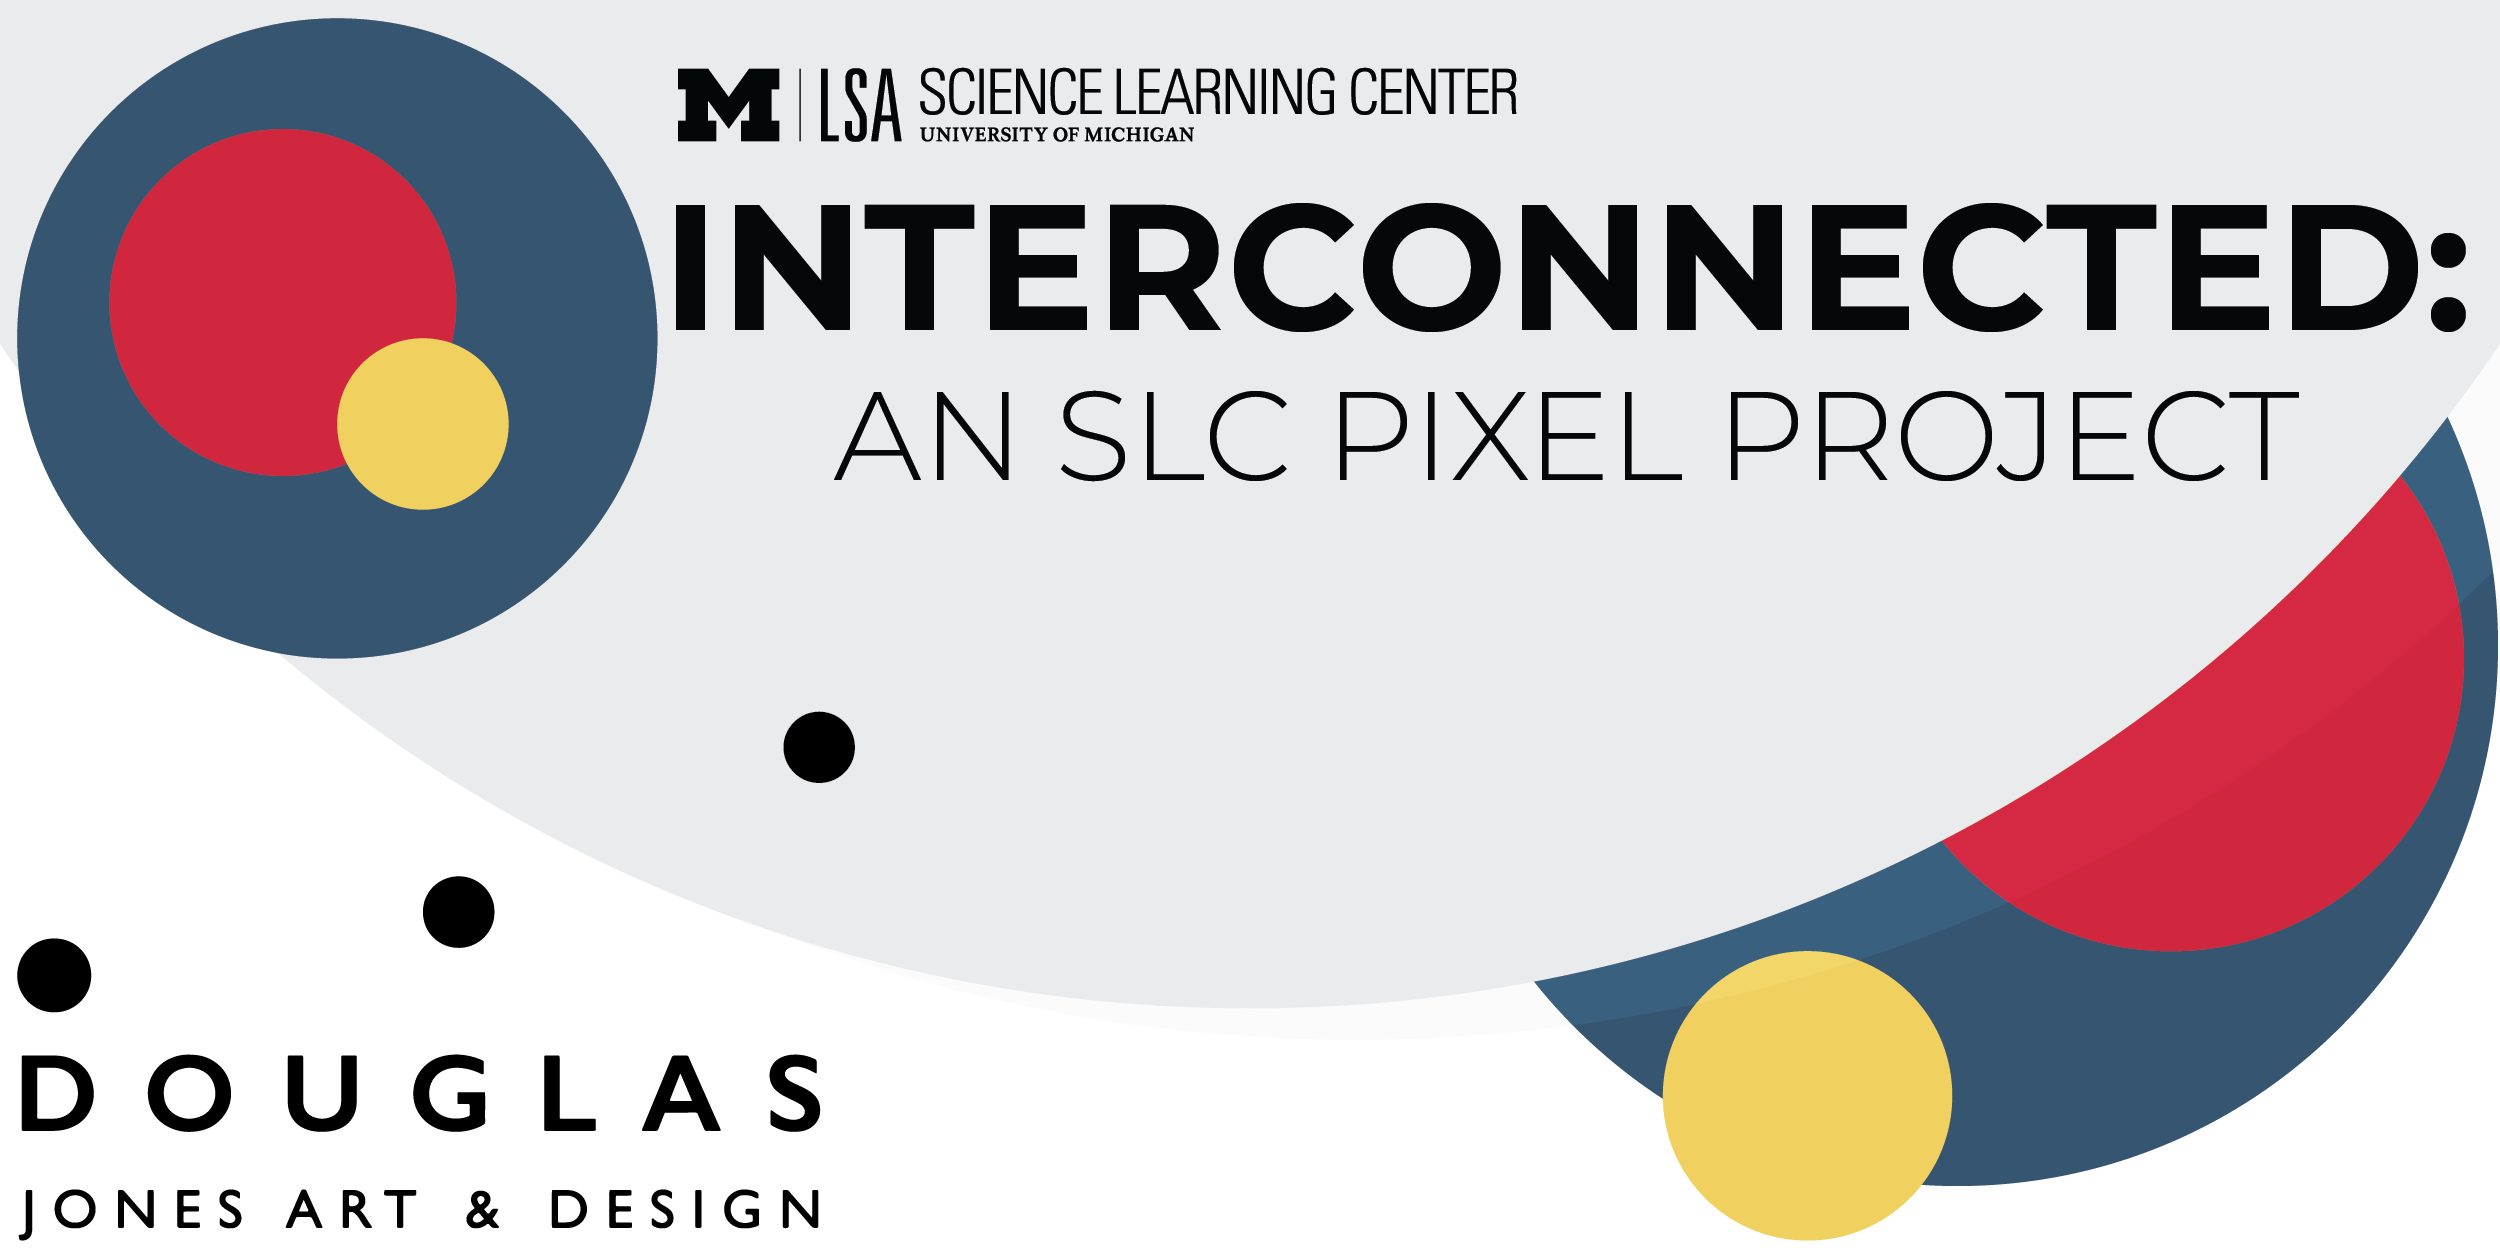 Science Learning Center Interconnectivity: An SLC Pixel Project